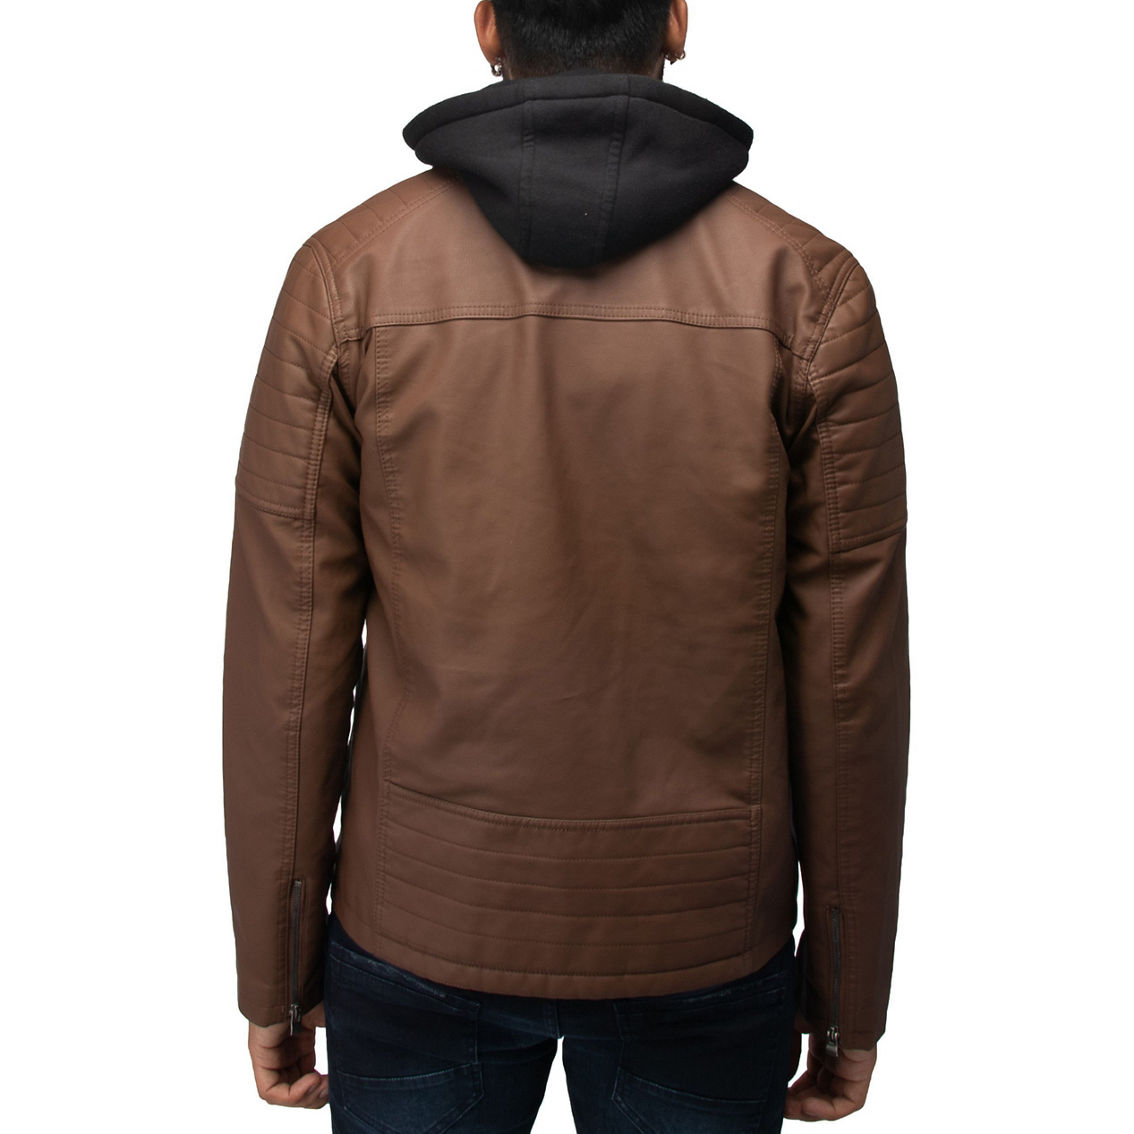 Men's Hooded Stand Collar PU Leather Jacket - Image 2 of 3